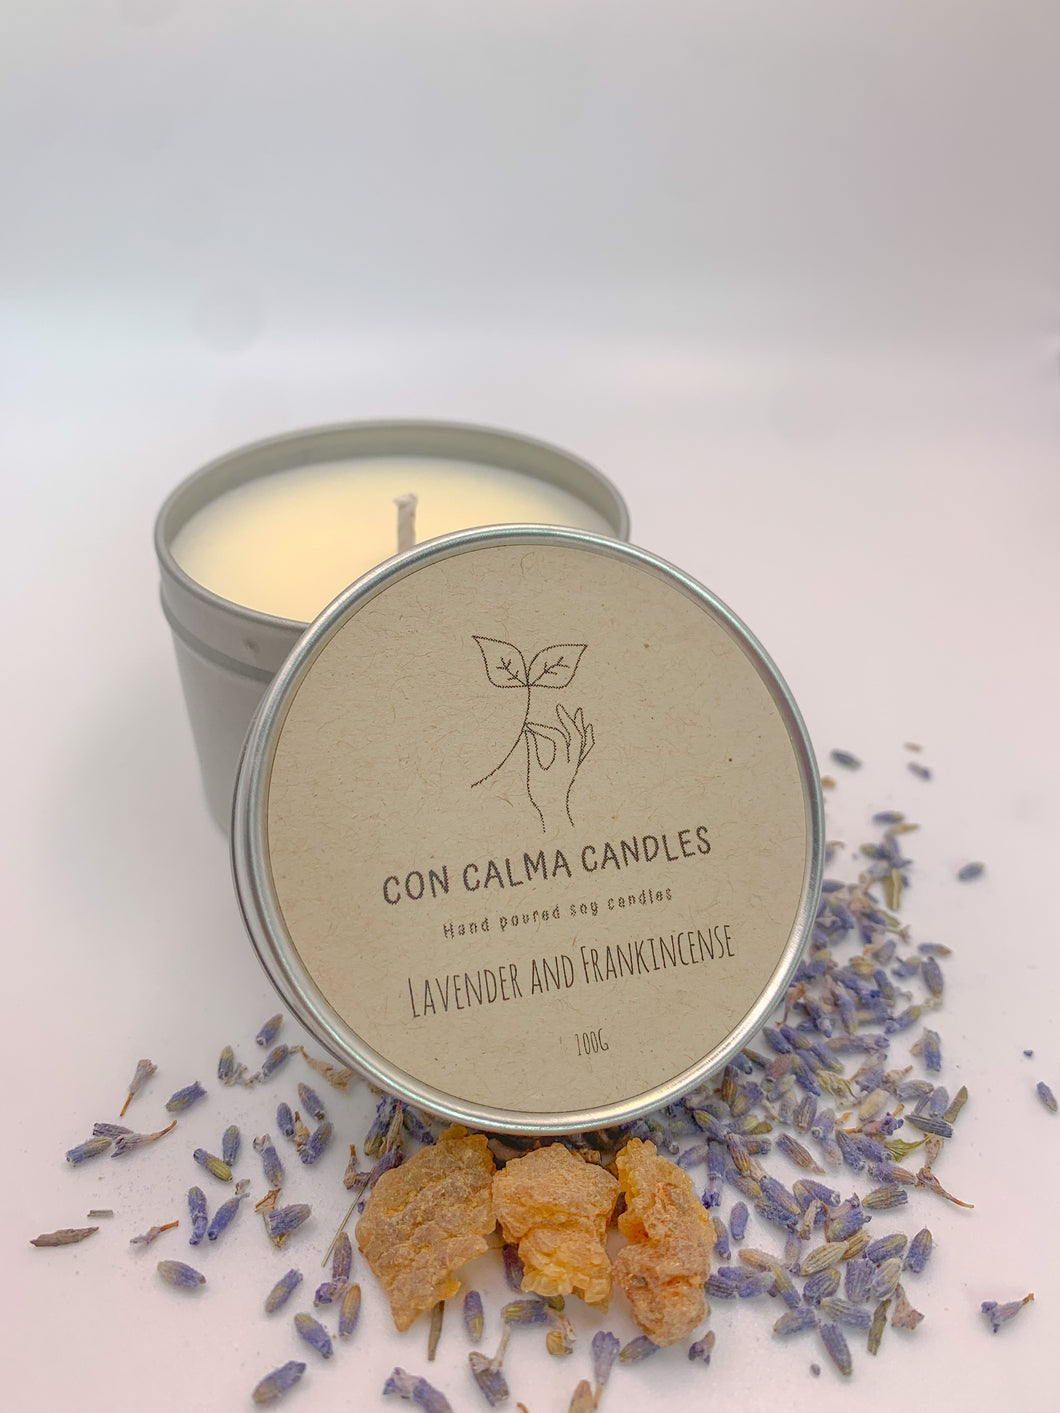 Lavender and Frankincense soy wax candle